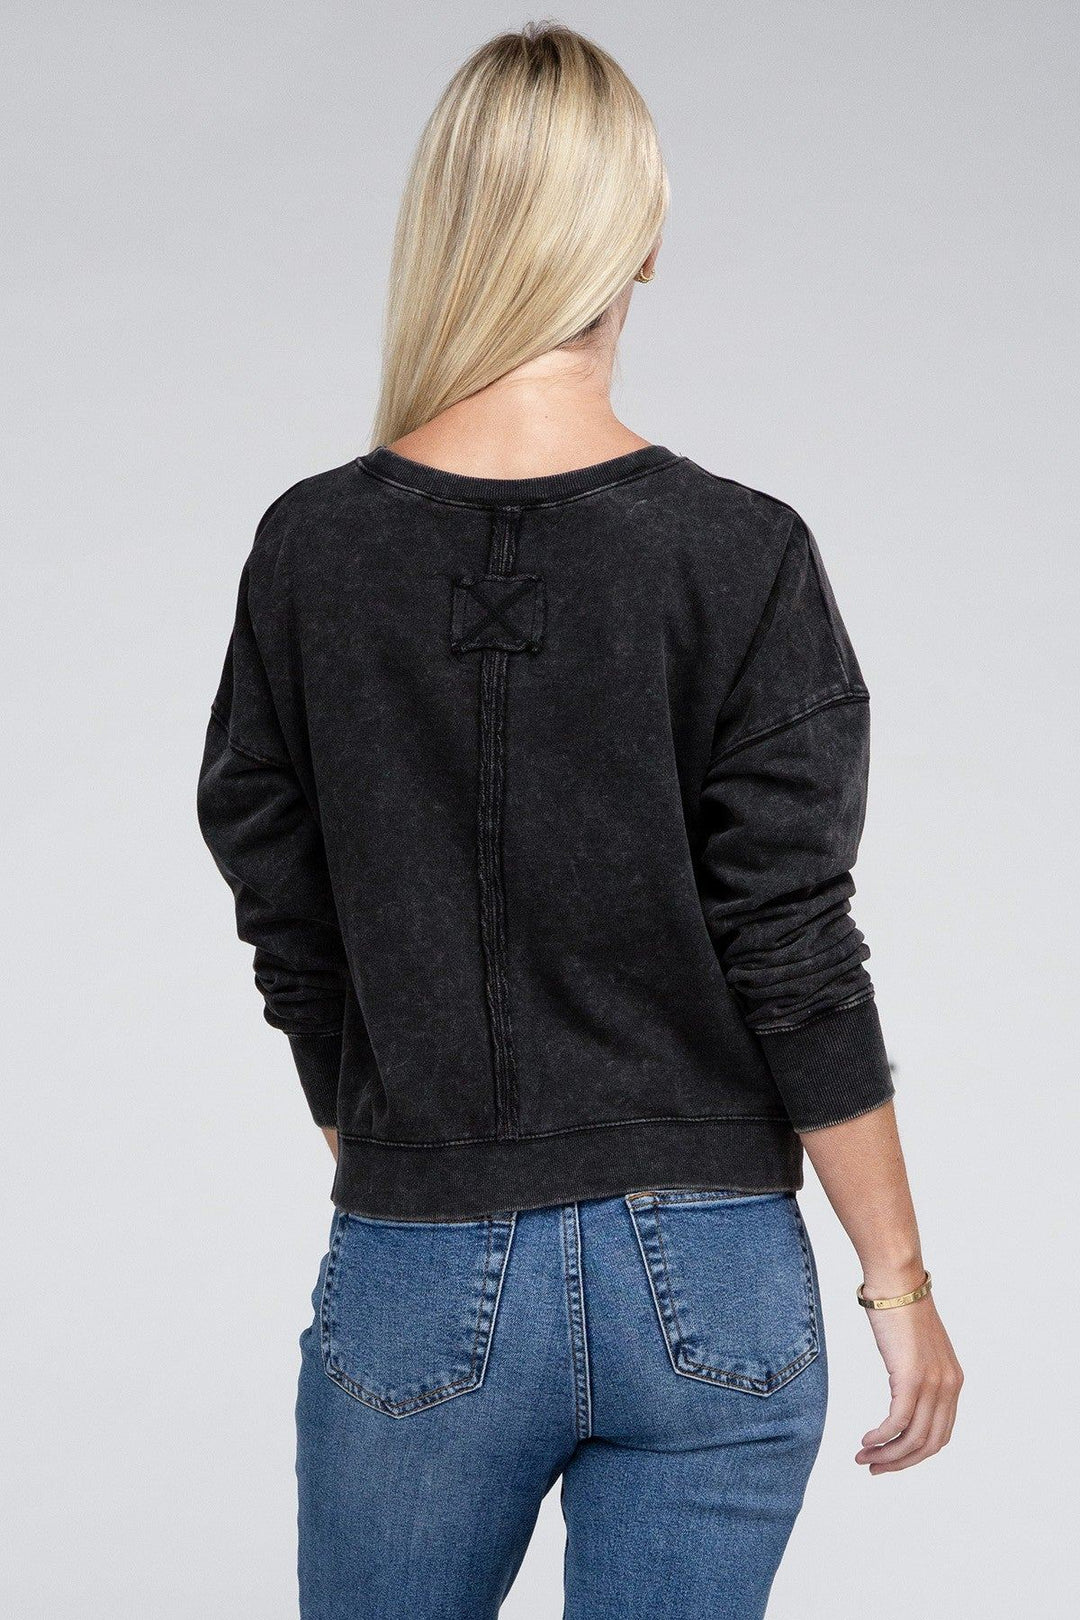 Zenana French Terry Pullover Sweatshirt - Inspired Eye Boutique